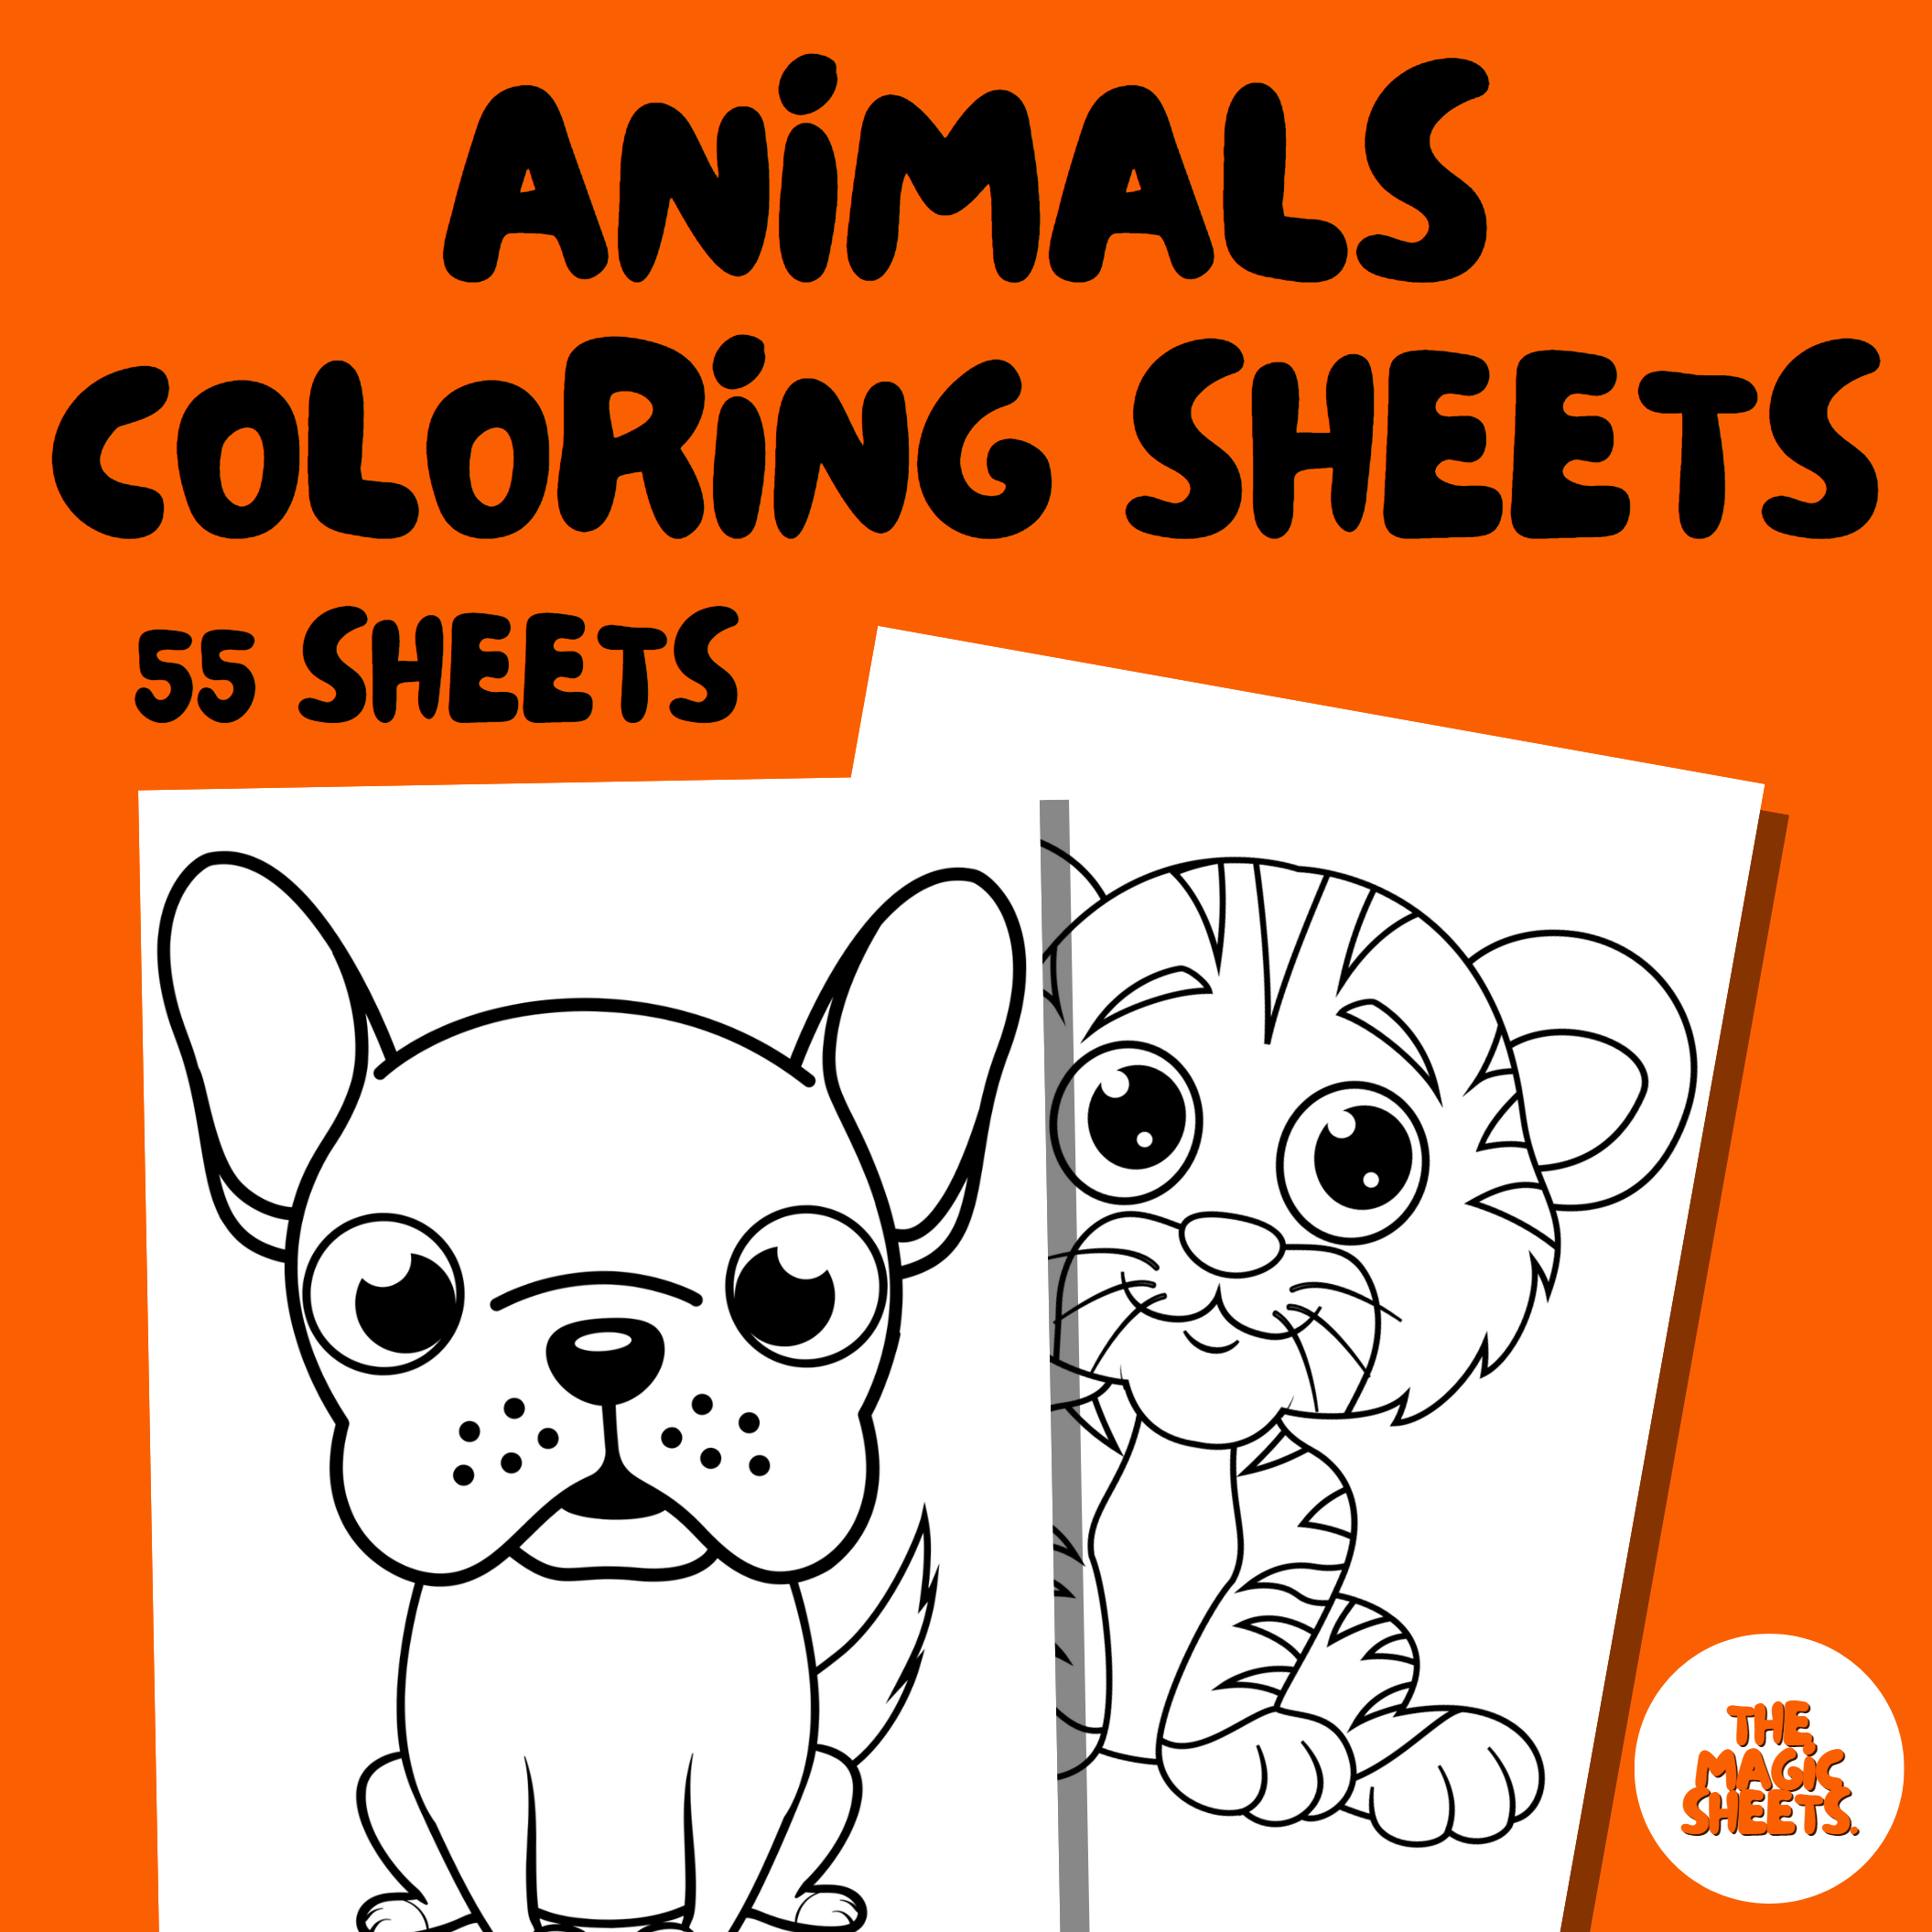 Animal coloring sheets for kids made by teachers